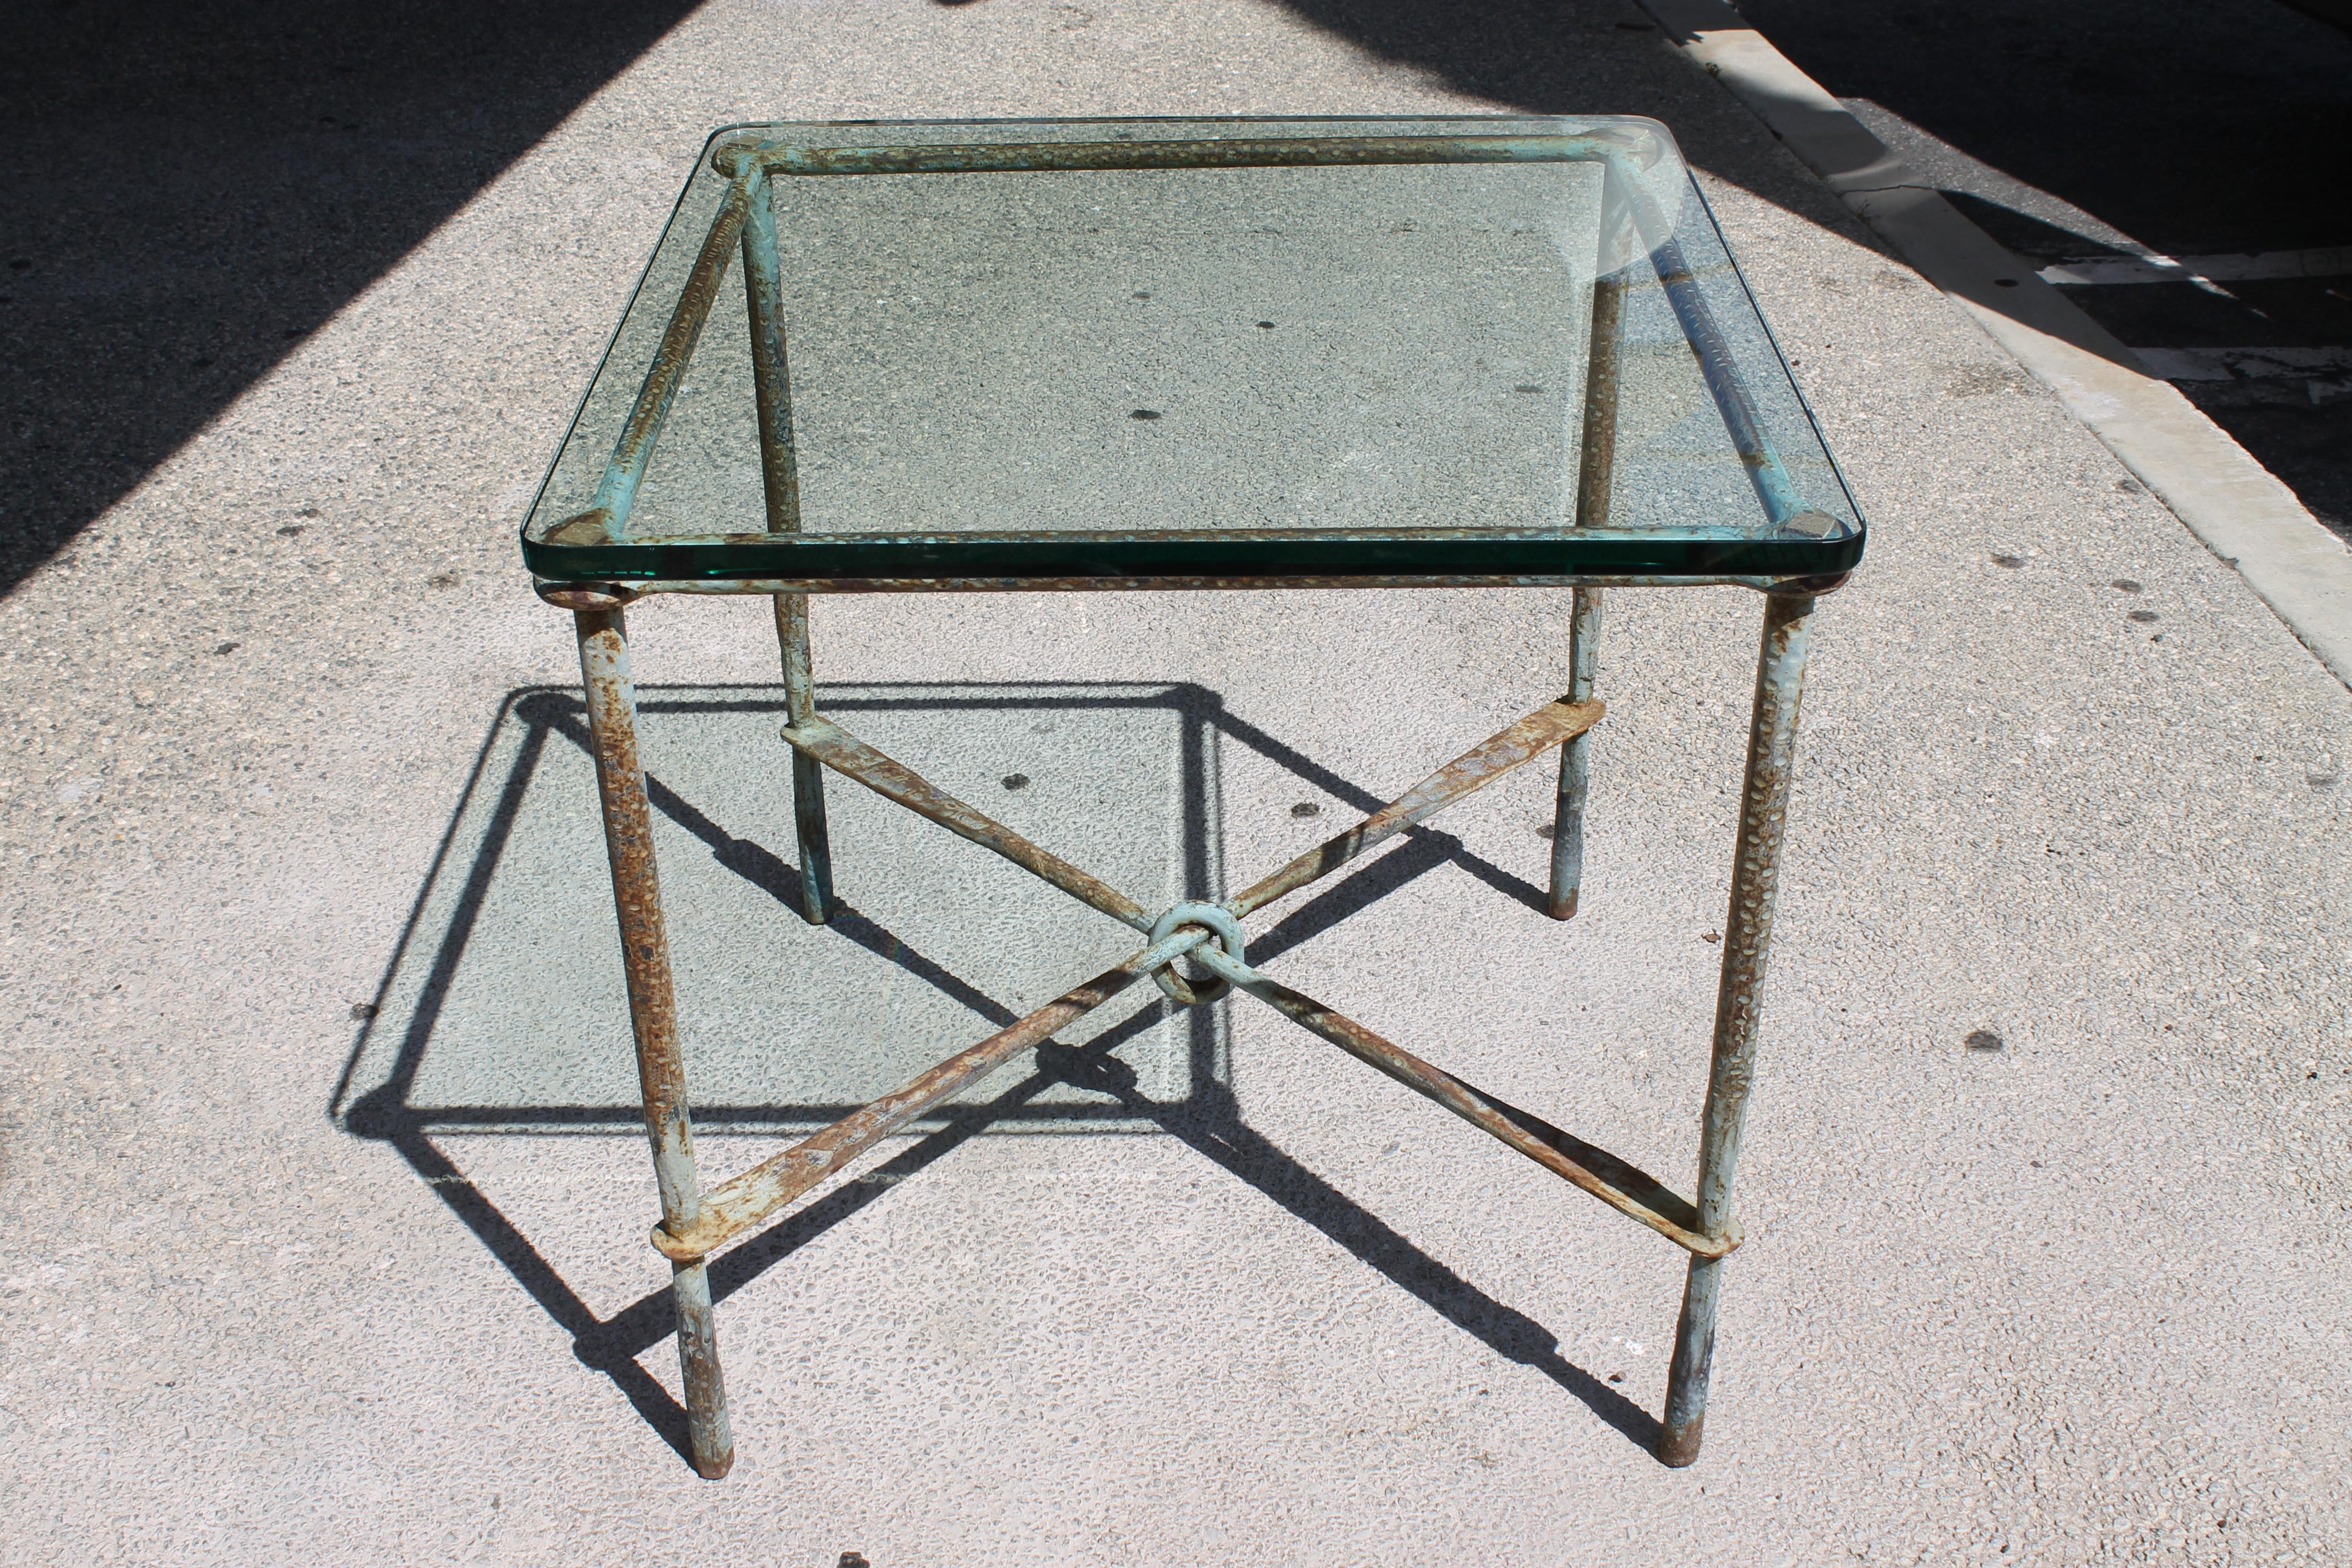 Hand hammered steel side table with original patina. We purchased a 3/4